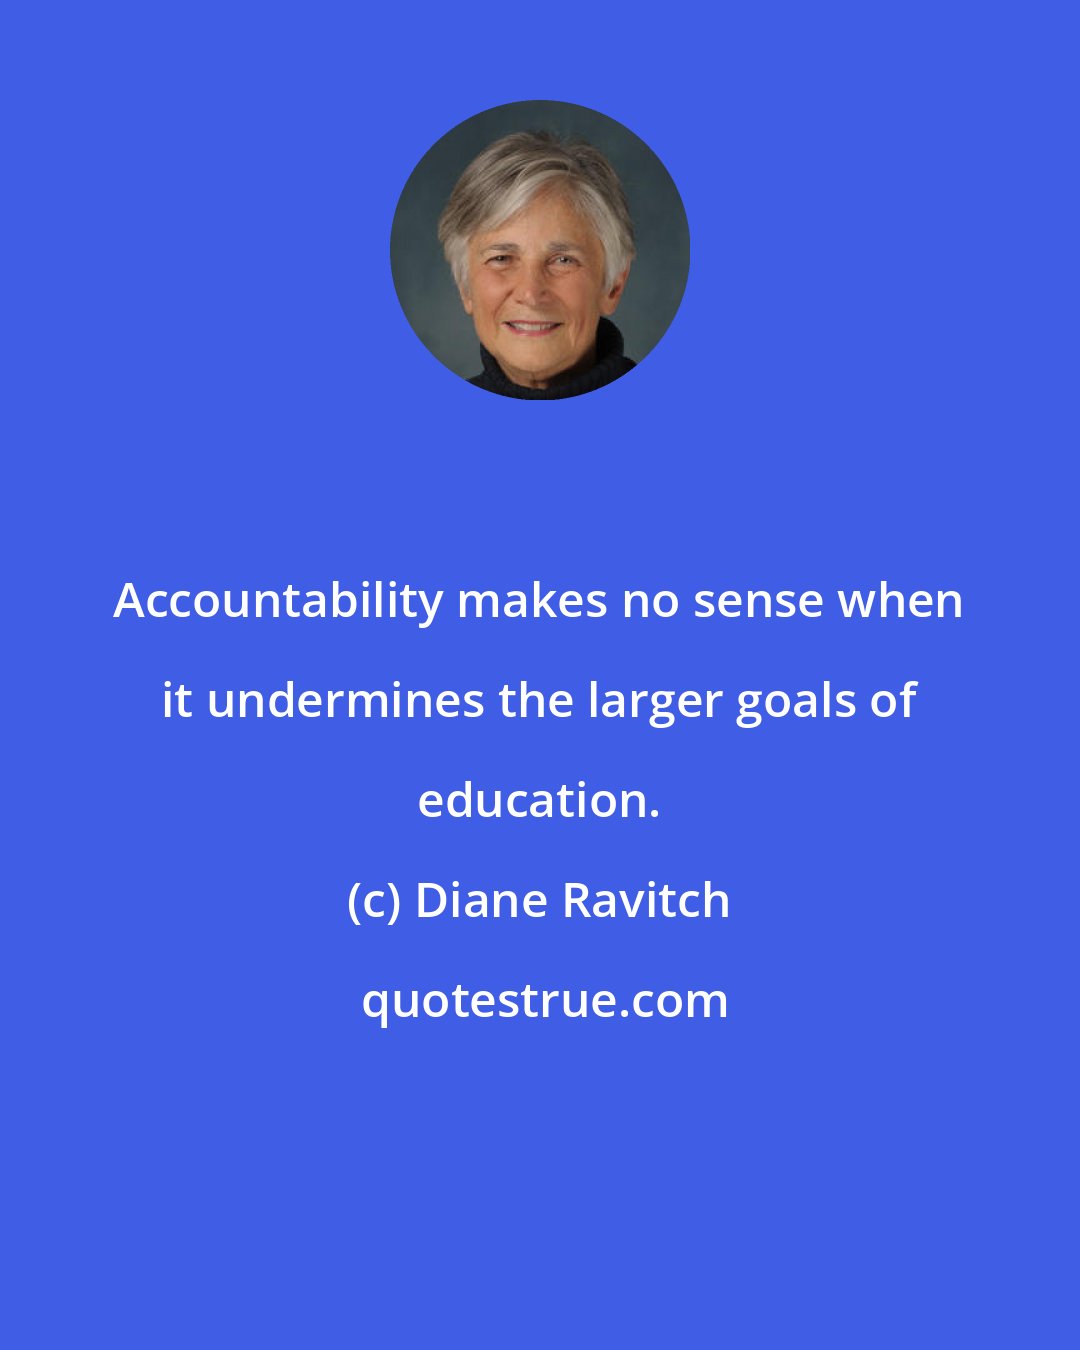 Diane Ravitch: Accountability makes no sense when it undermines the larger goals of education.